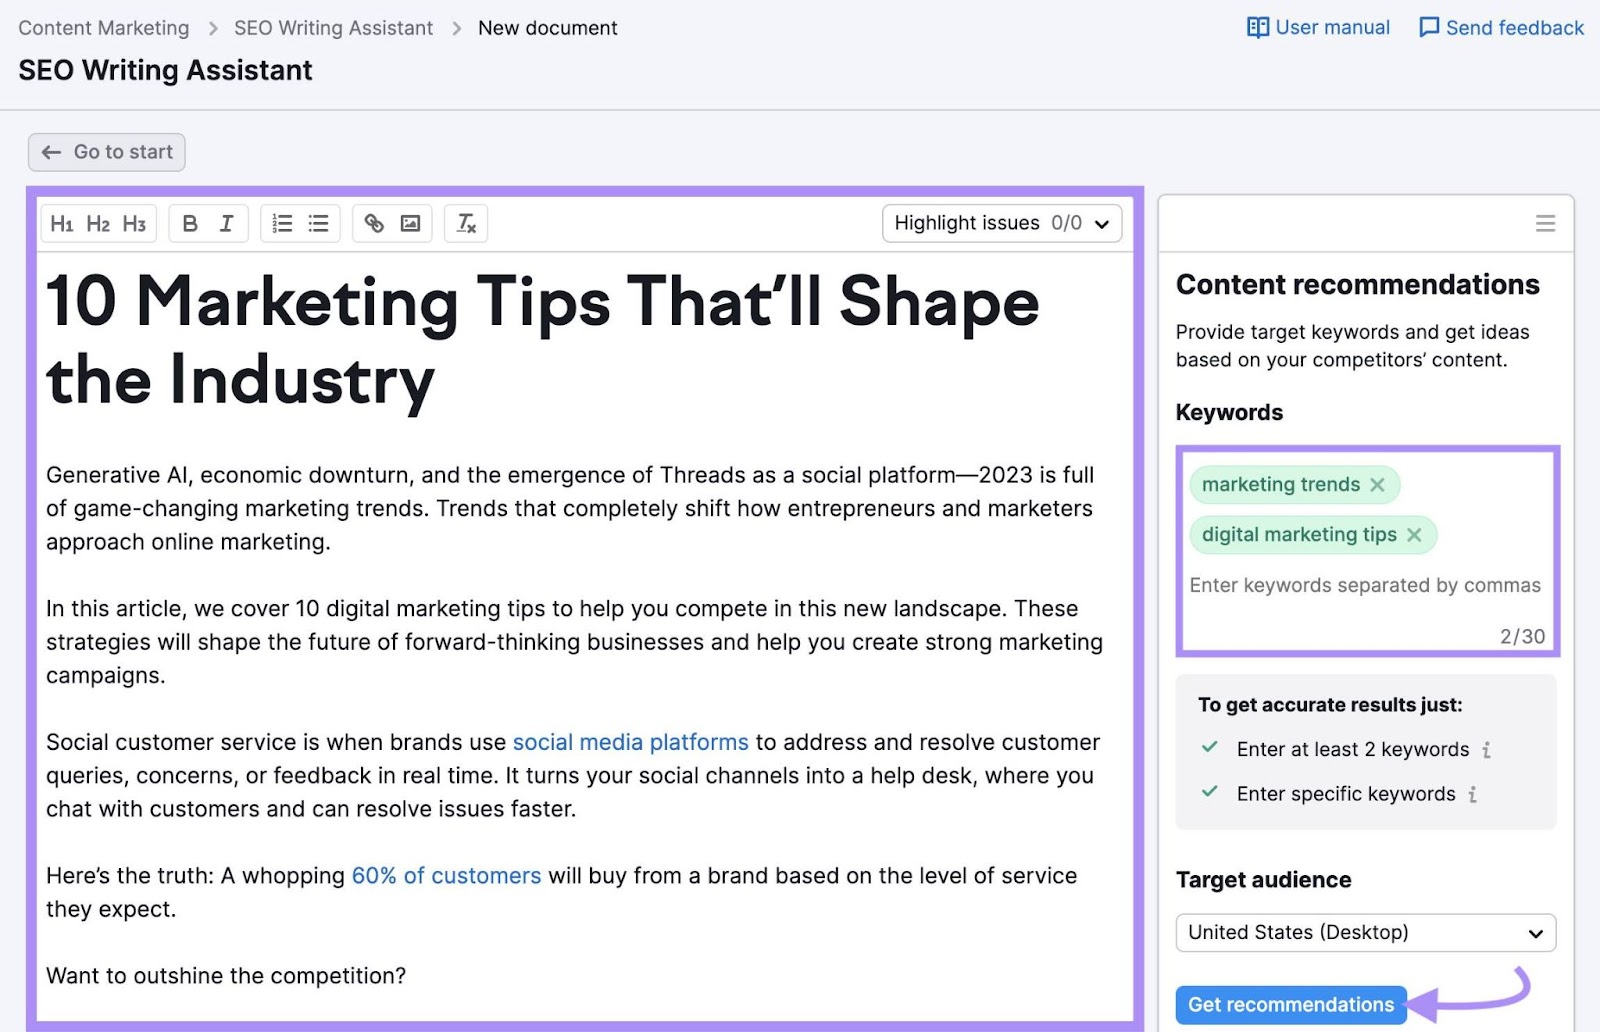 "10 Marketing Tips That'll Shape the Industry" articled entered into SEO Writing Assistant